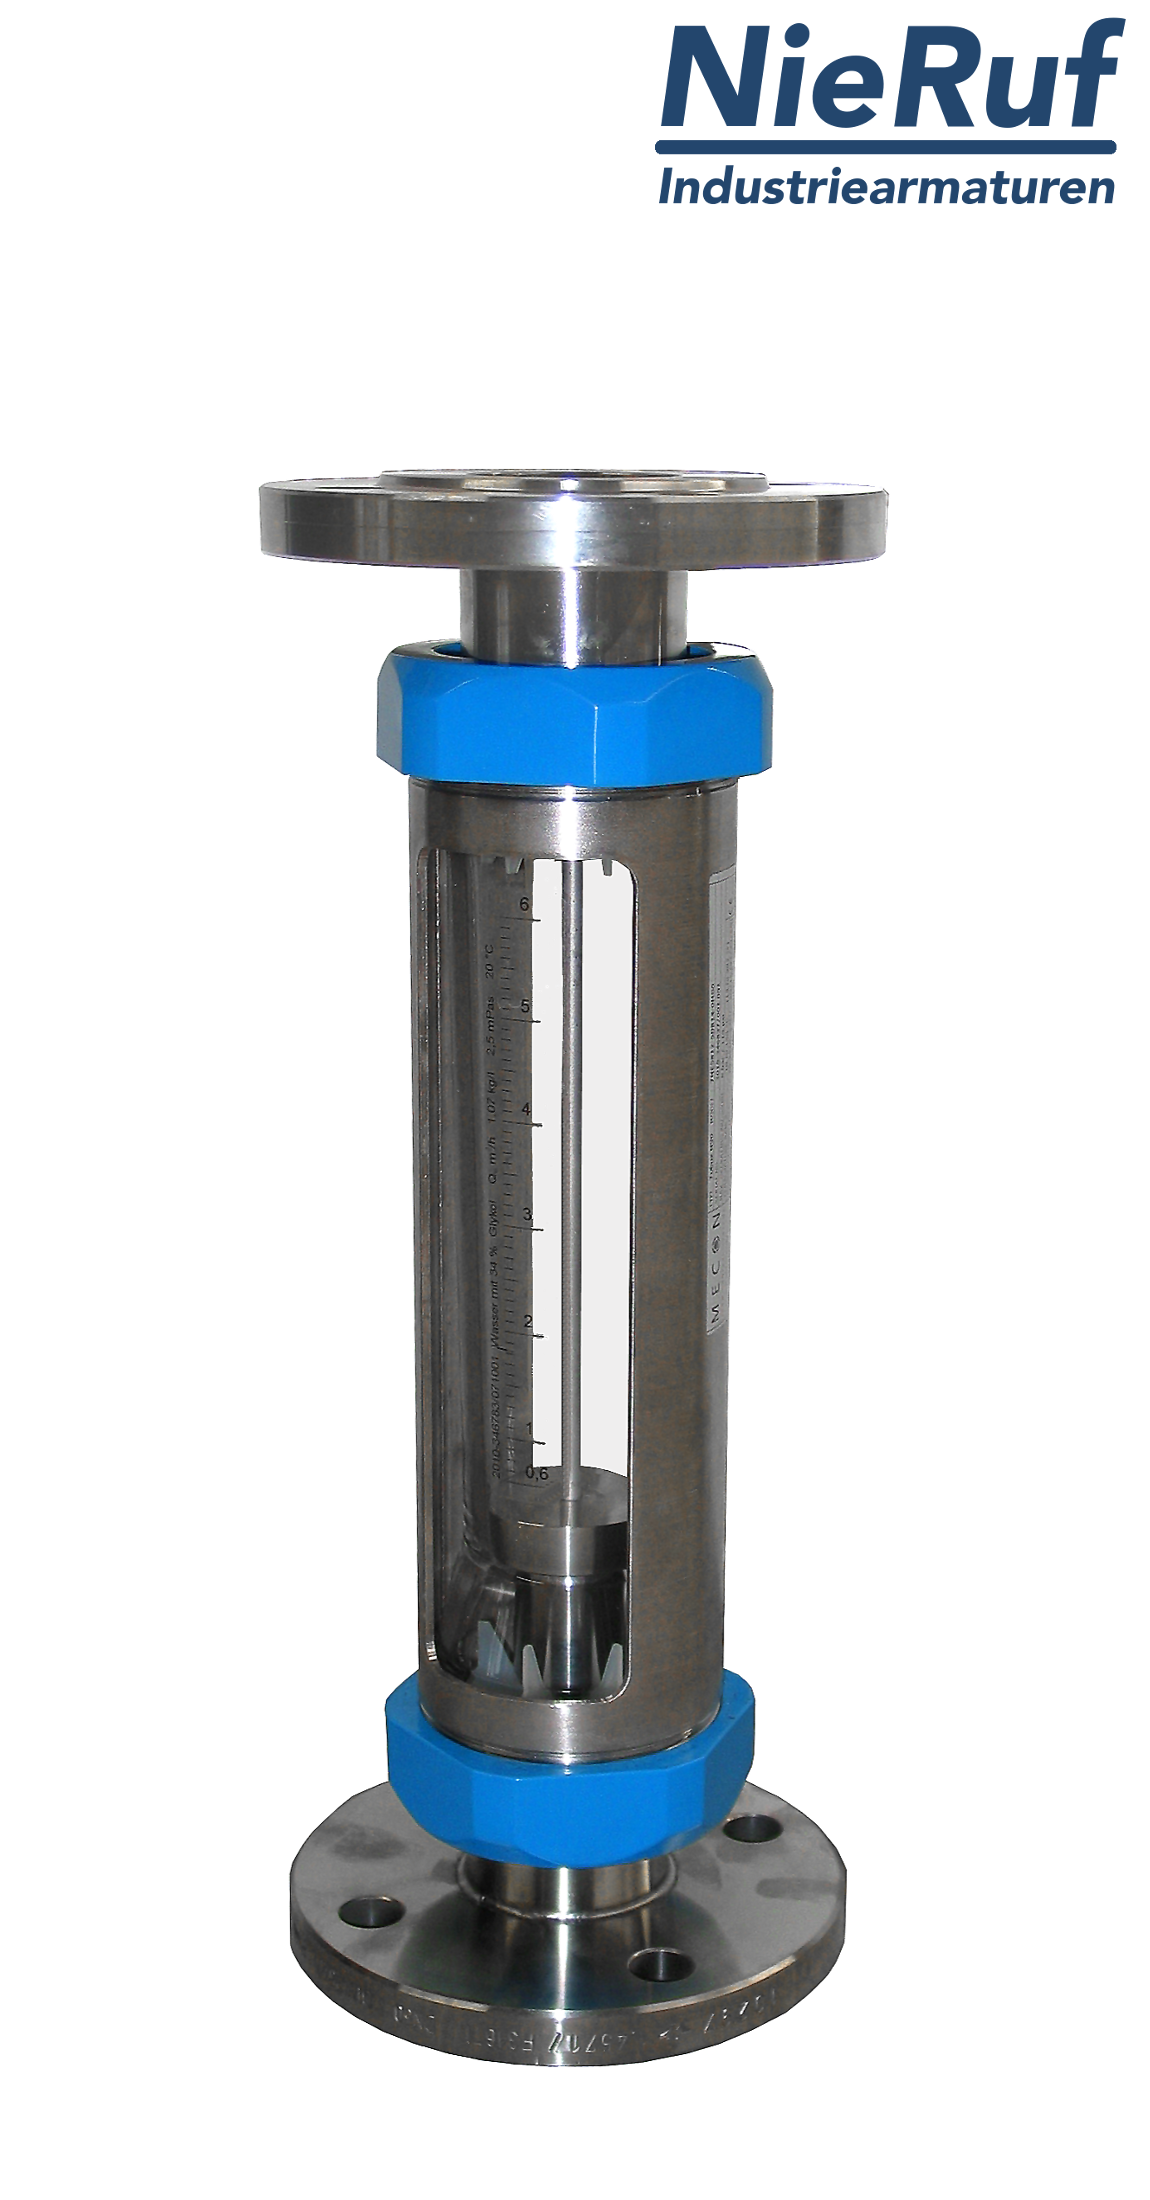 Variable area flowmeter stainless steel + borosilicate flange DN20 40.0 - 400.0 l/h water FKM